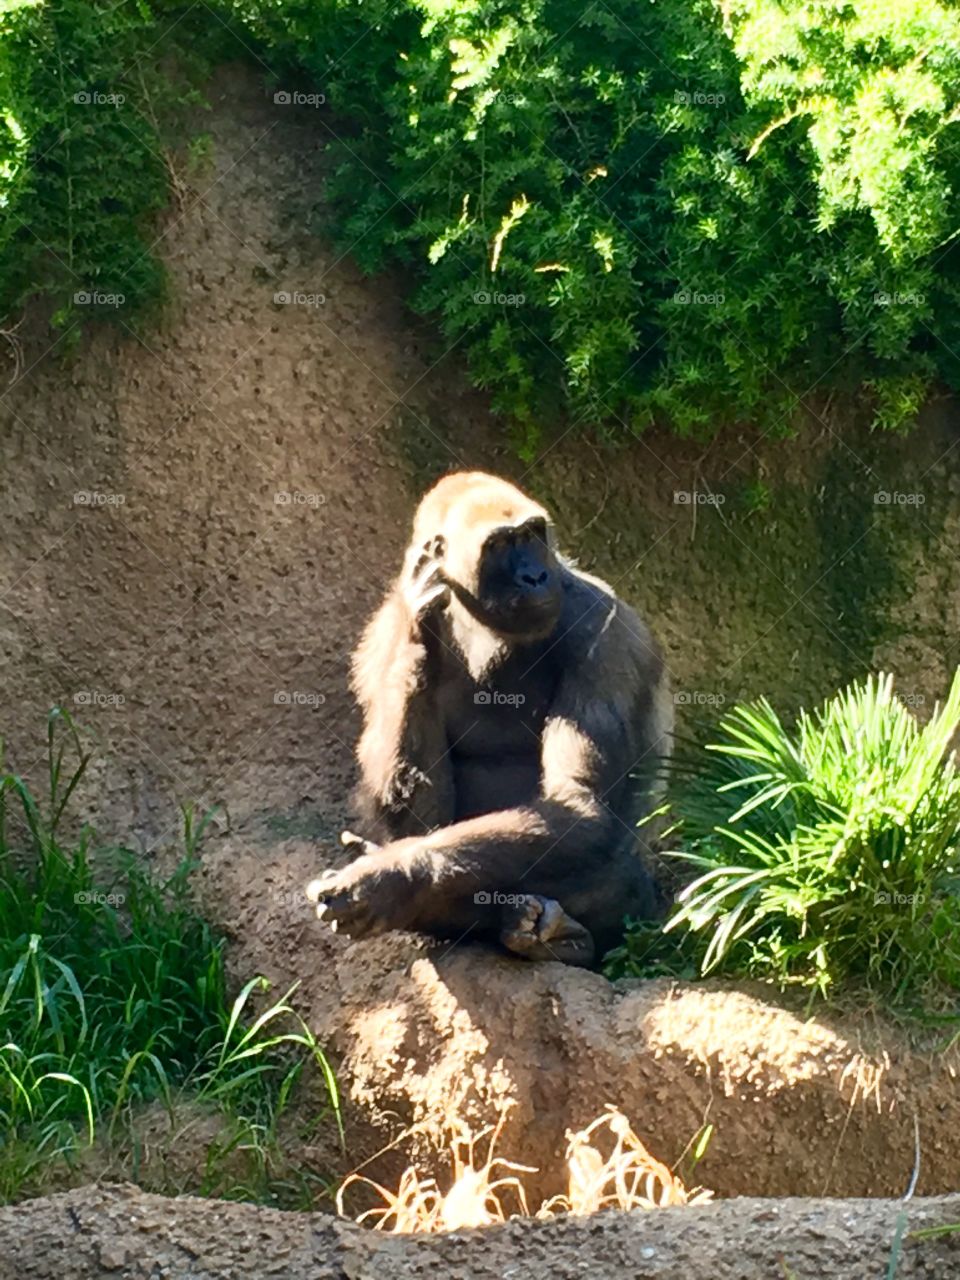 Gorilla in thought
